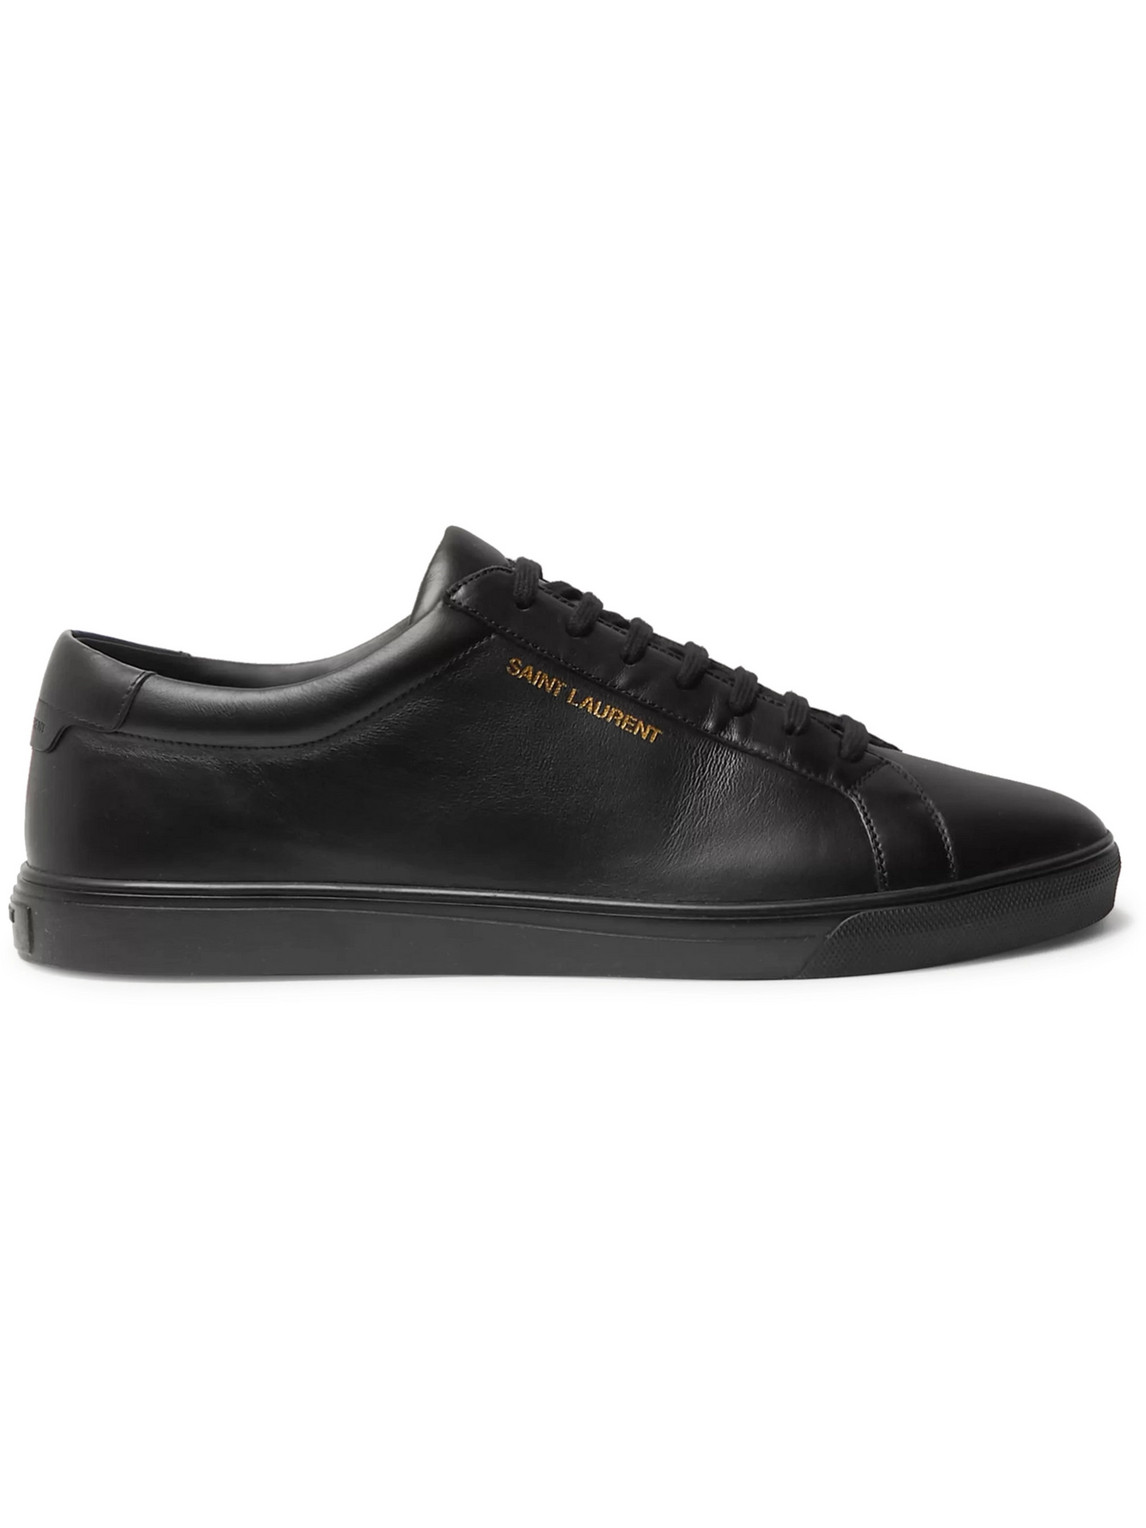 Andy Moon Leather Sneakers